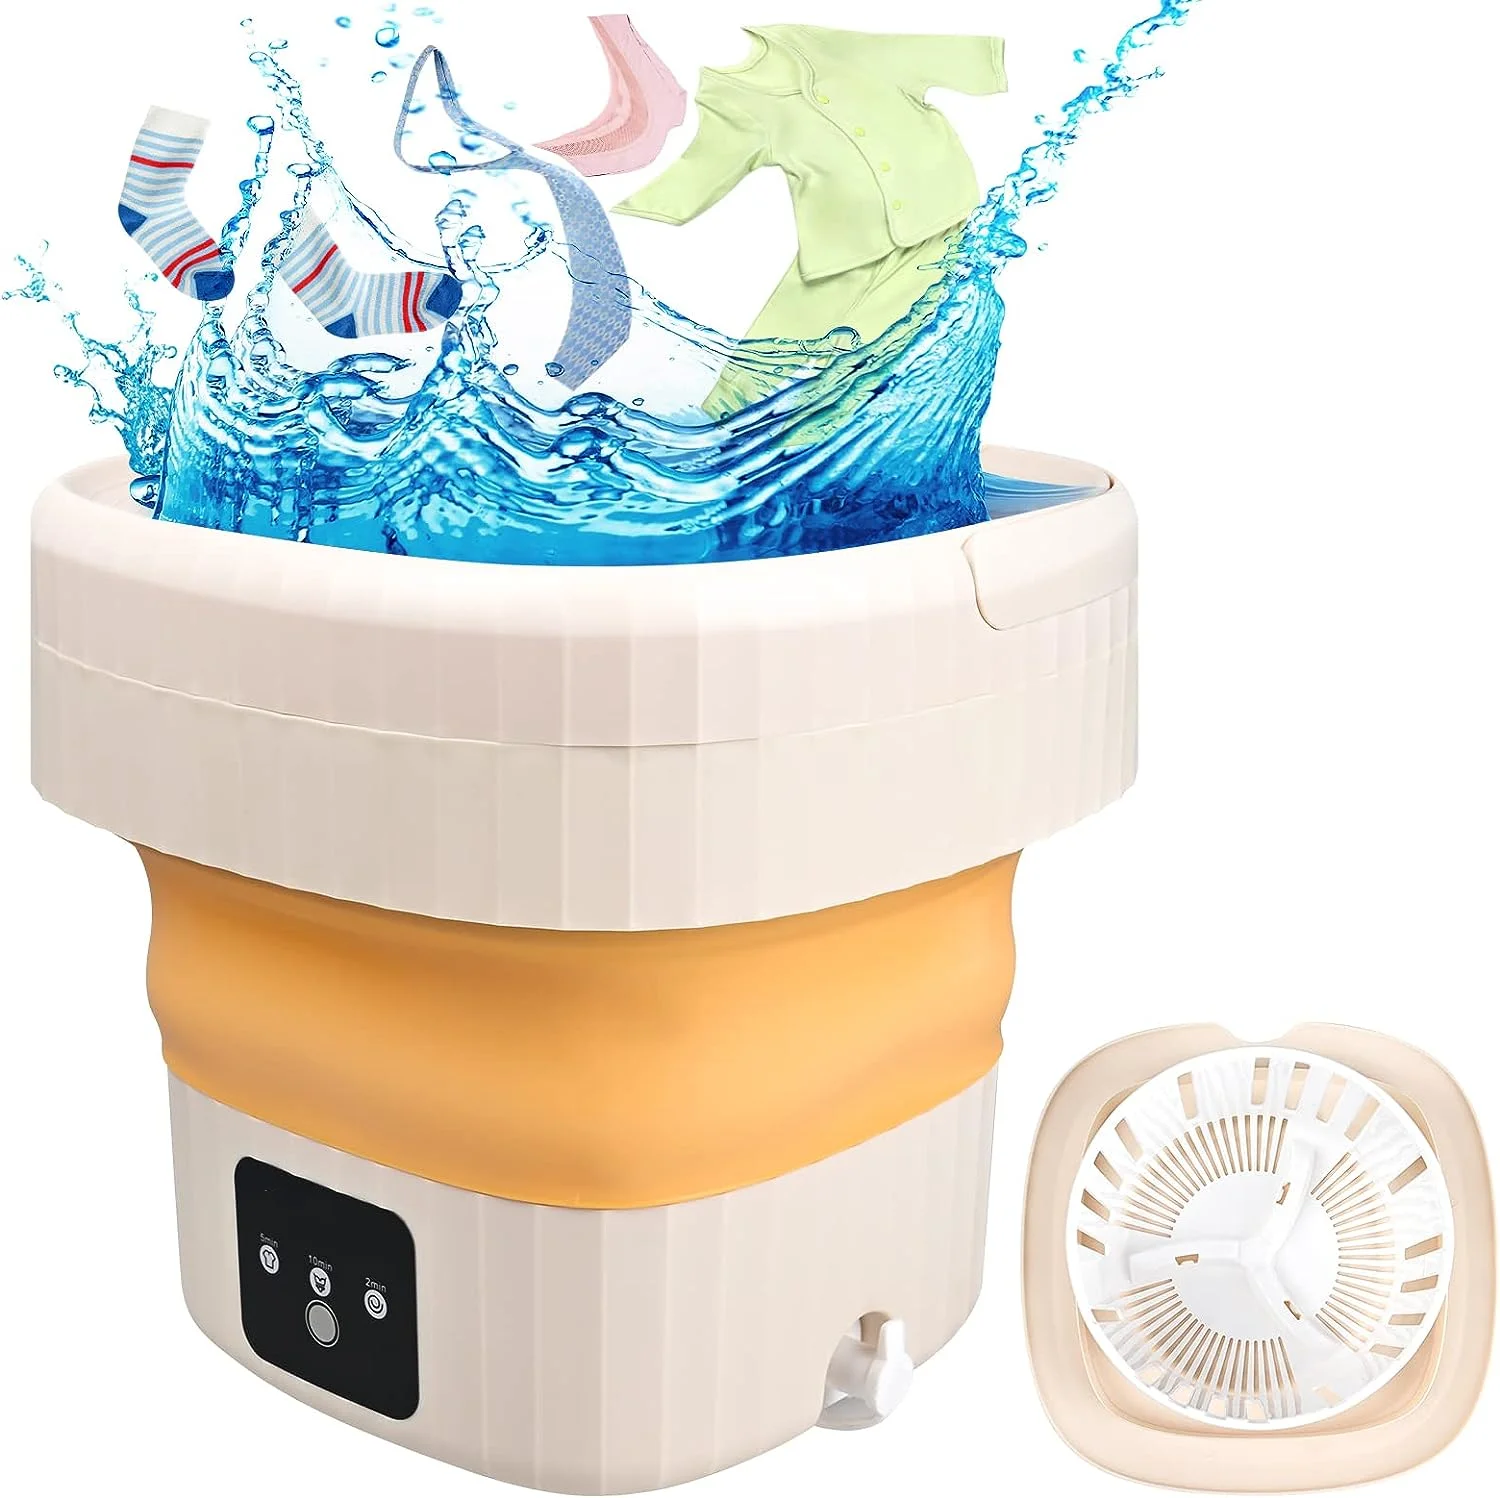 

Washing Machine Mini Portable Clothes Washer and Dryer Small Bucket Washer with Touch Screen and Drain Basket for Camping, Apart